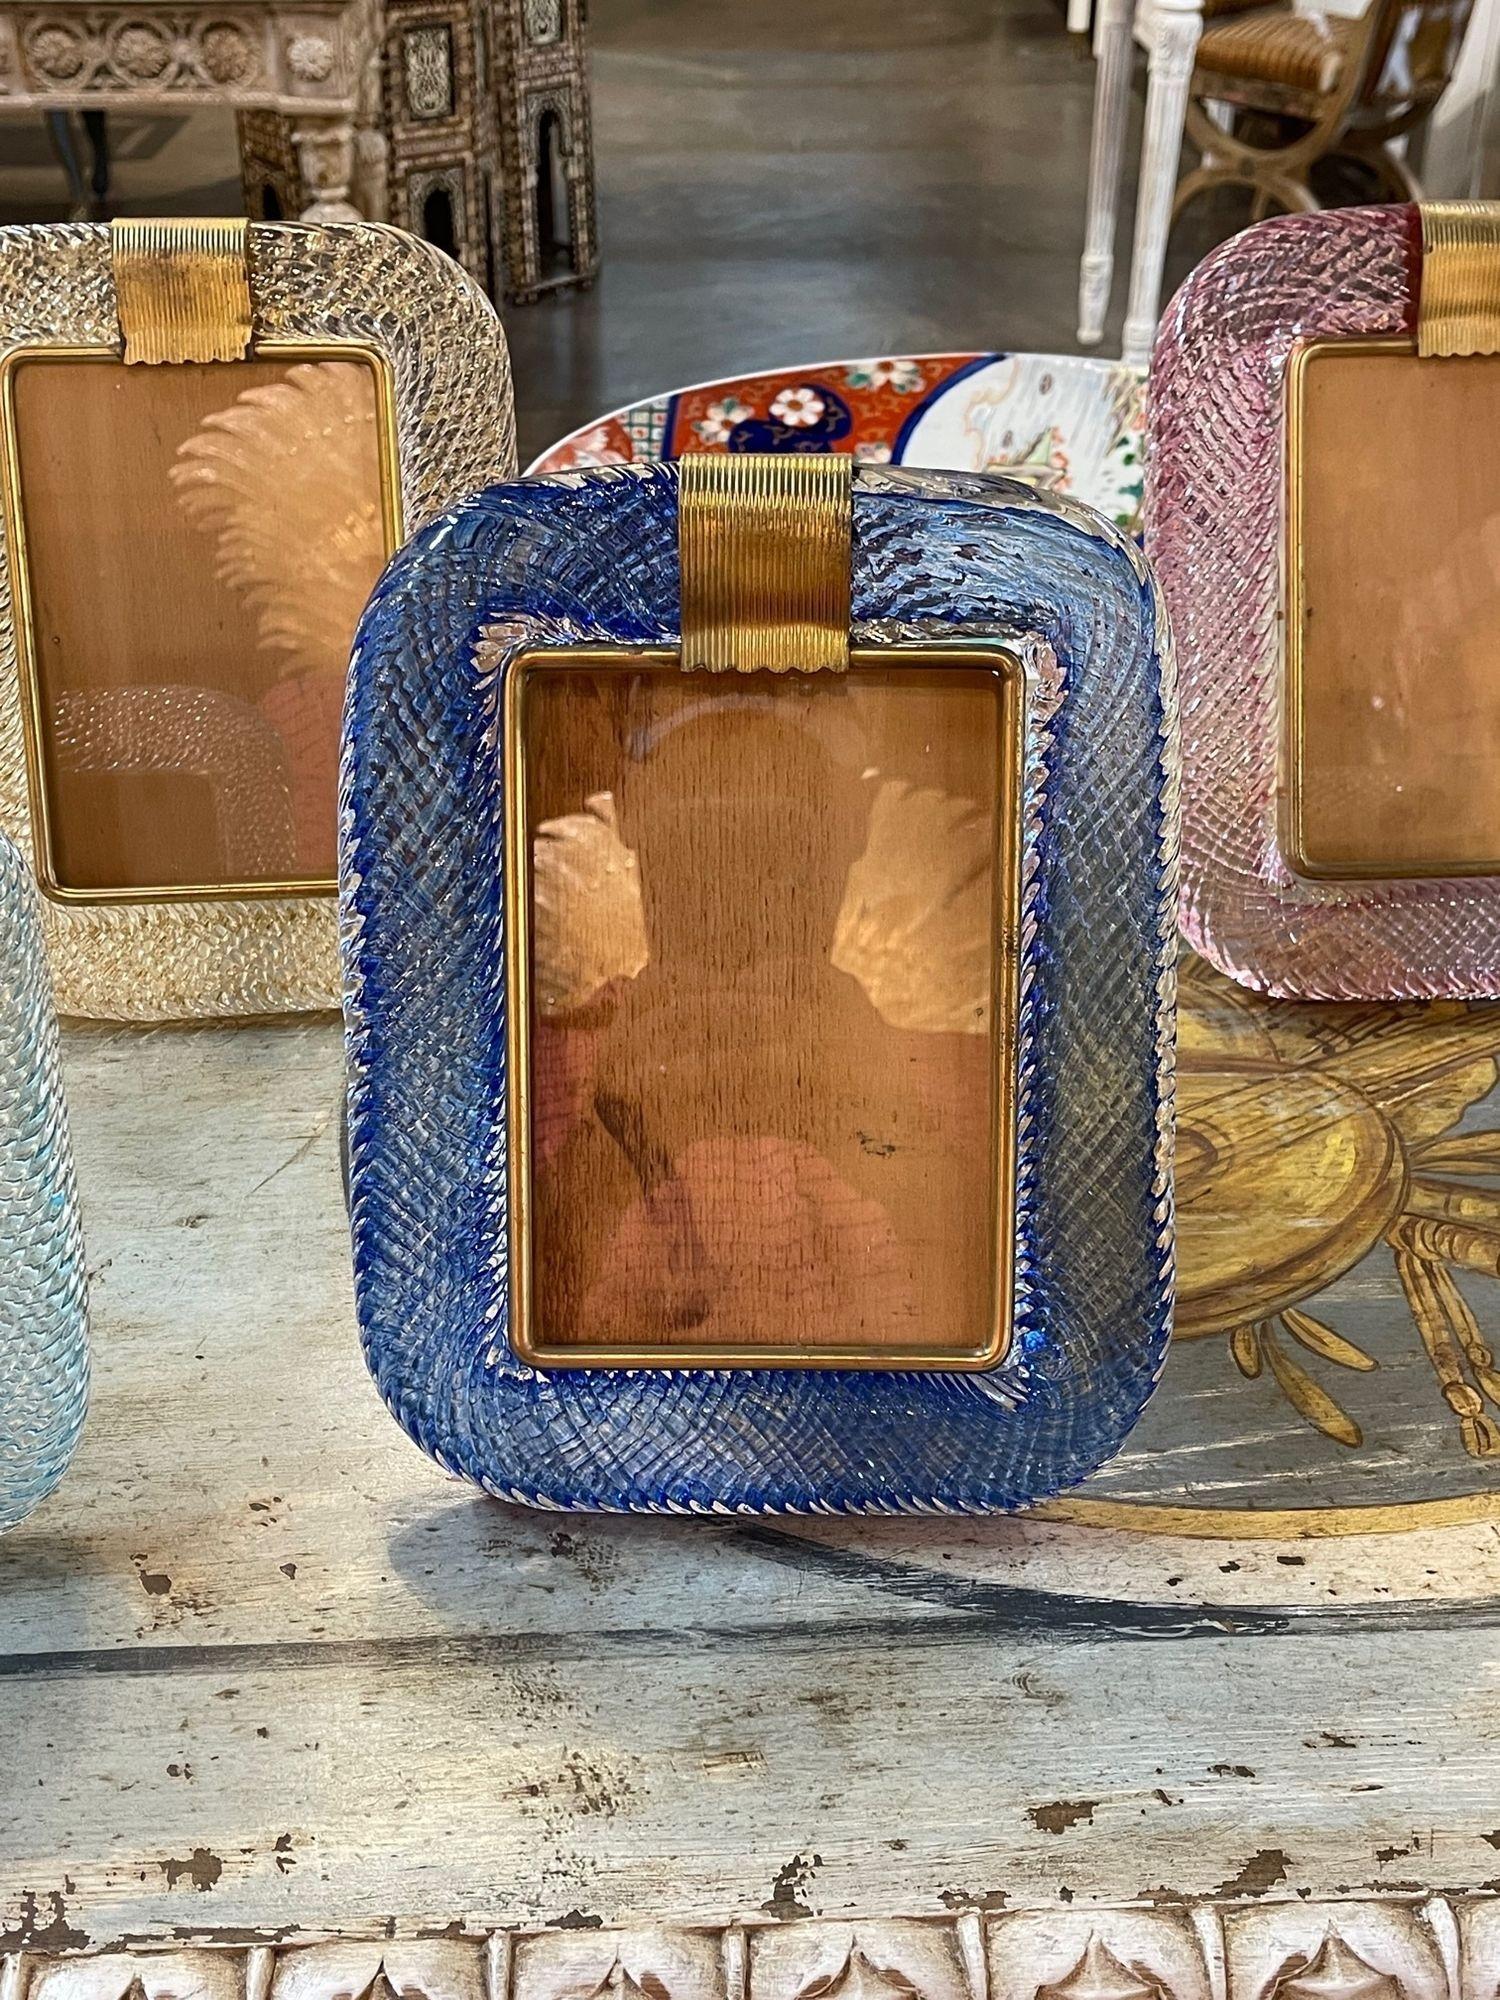 Decorative royal blue Murano glass picture frame. Featuring beautiful textured glistening glass. Also available in other colors as you can see in the pictures. Makes a fabulous accessory or special gift!.